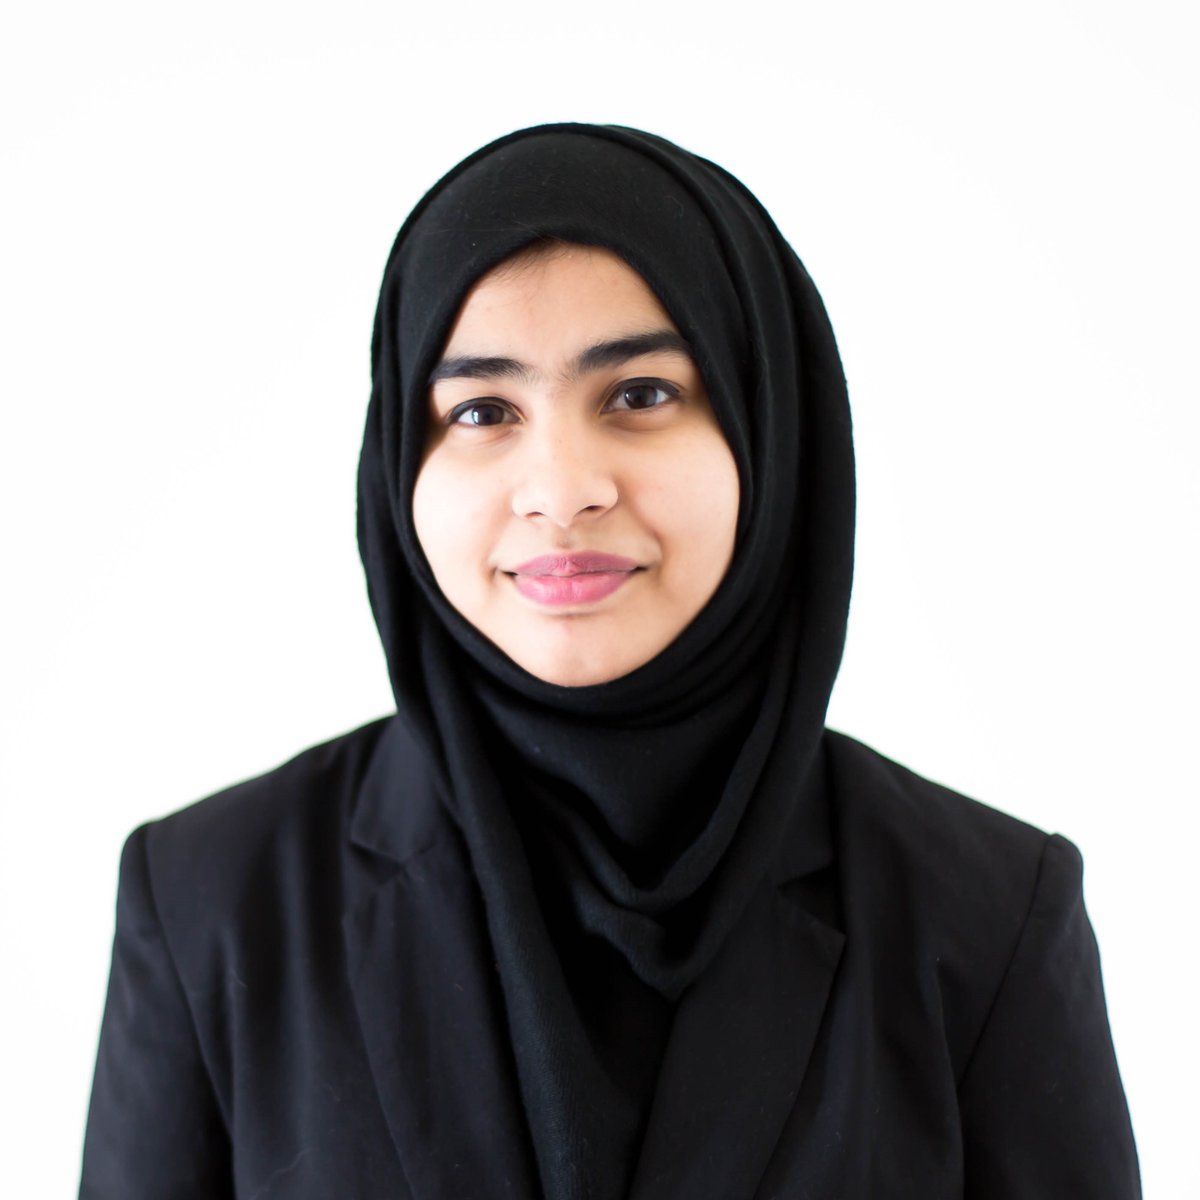 Exciting news for one of our grad students. Asiya Jabeen's poster has been selected for the MIT Outstanding Poster Competition. She will present her poster on Wednesday, May 8 from 5:30 – 7 pm PT in Room 2AB in the Seattle Convention Center. Make sure to visit her poster!